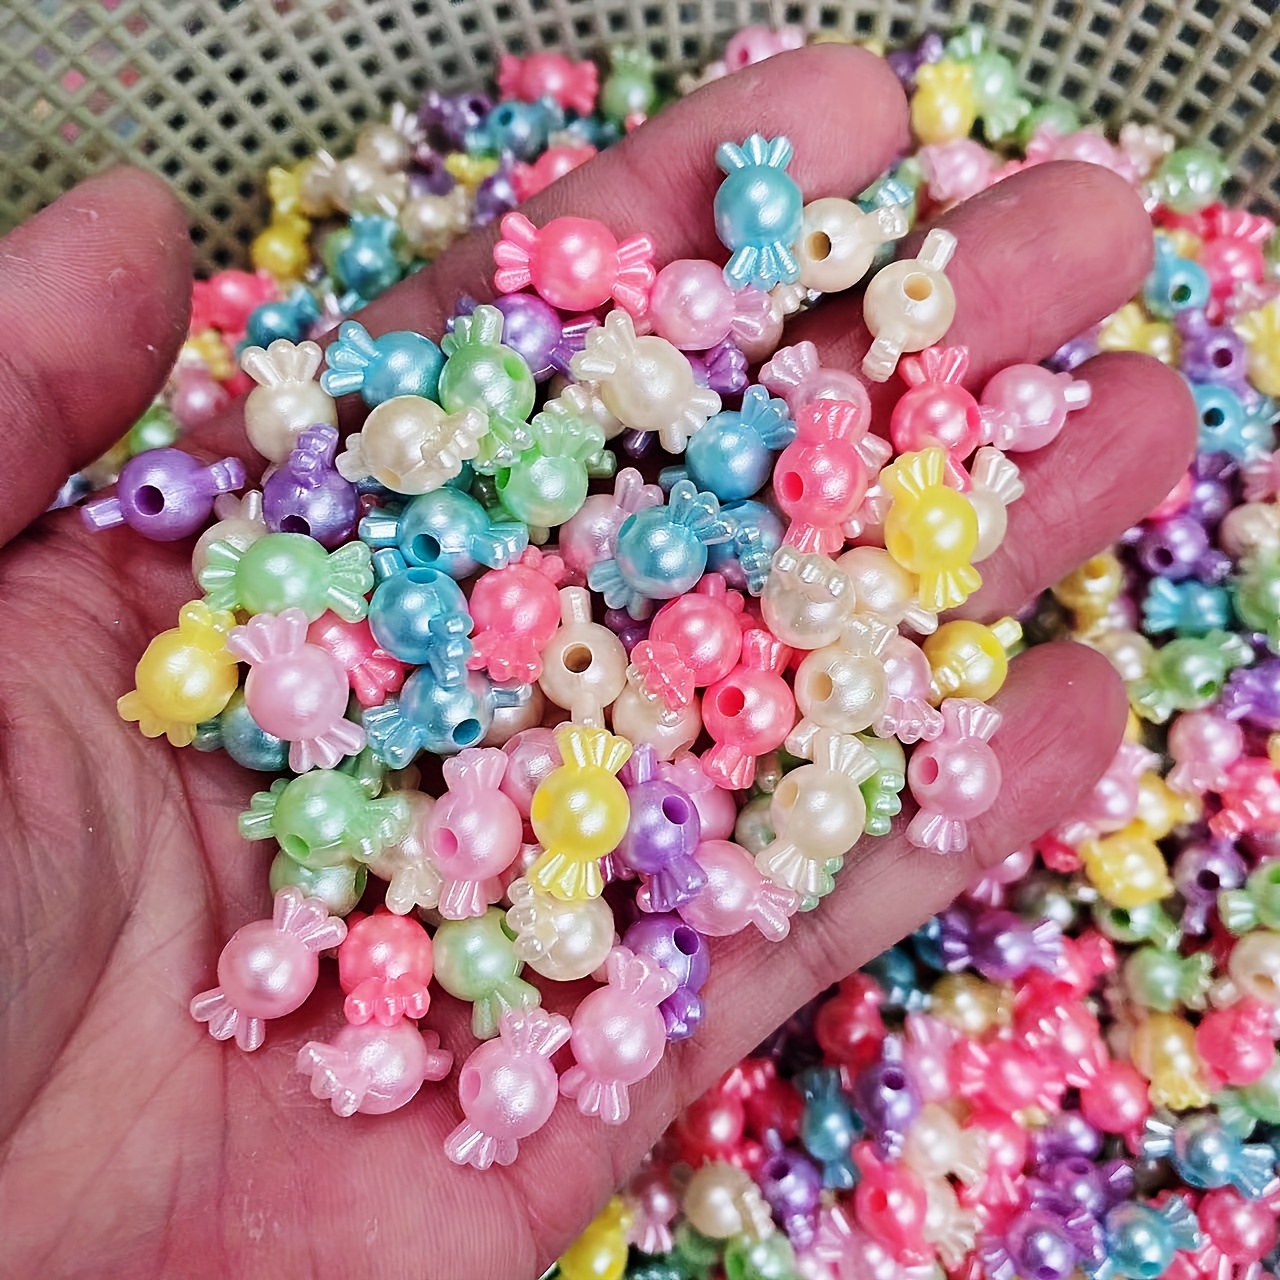 9mm Silicone Beads, Soft Beads, Rubber Beads, Jewelry Making Beads, Beads  for Kids, Rainbow Beads, Pastel Beads, Food Grade Beads 